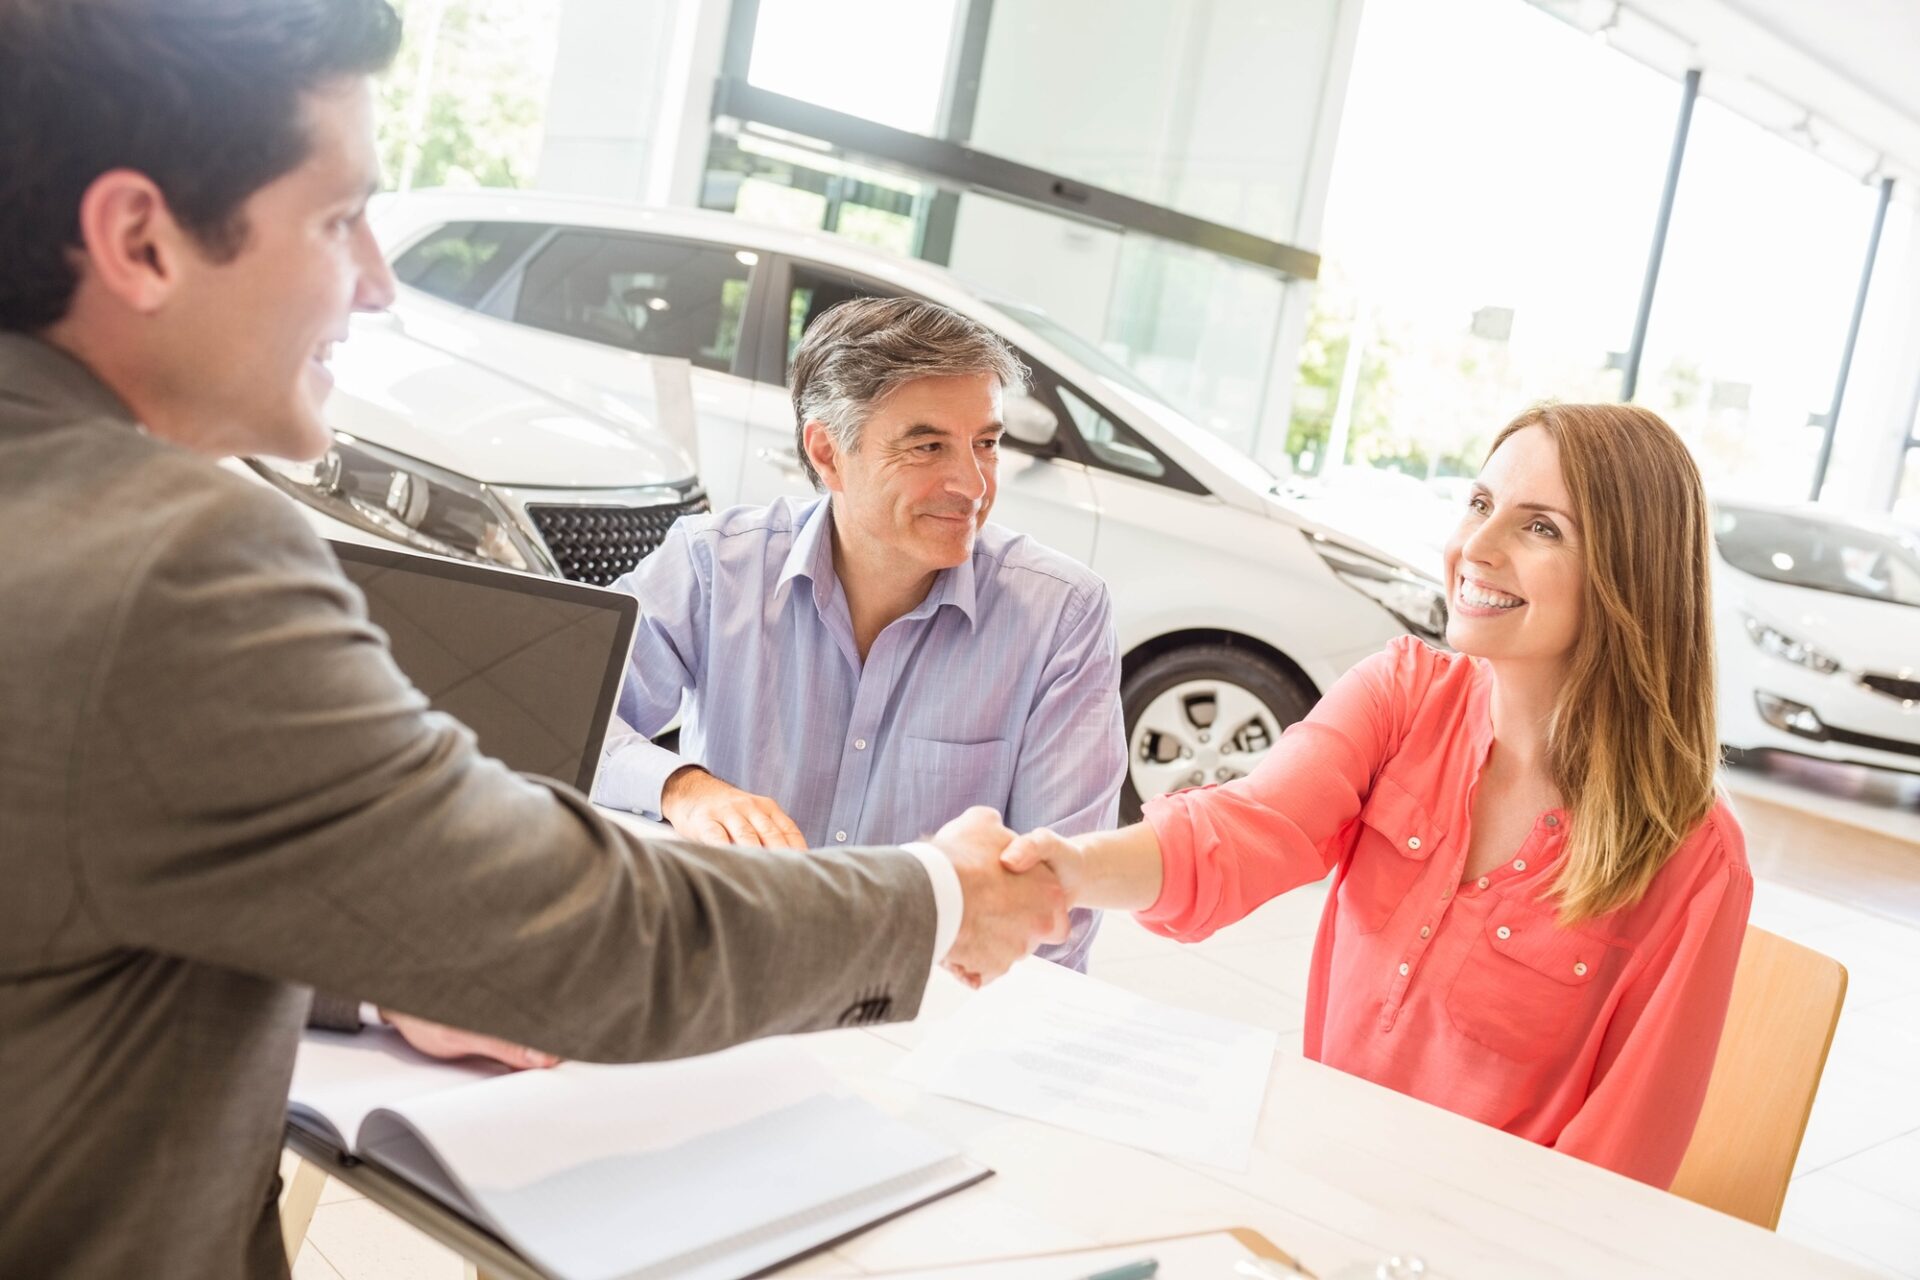 Smiling couple buying a new car